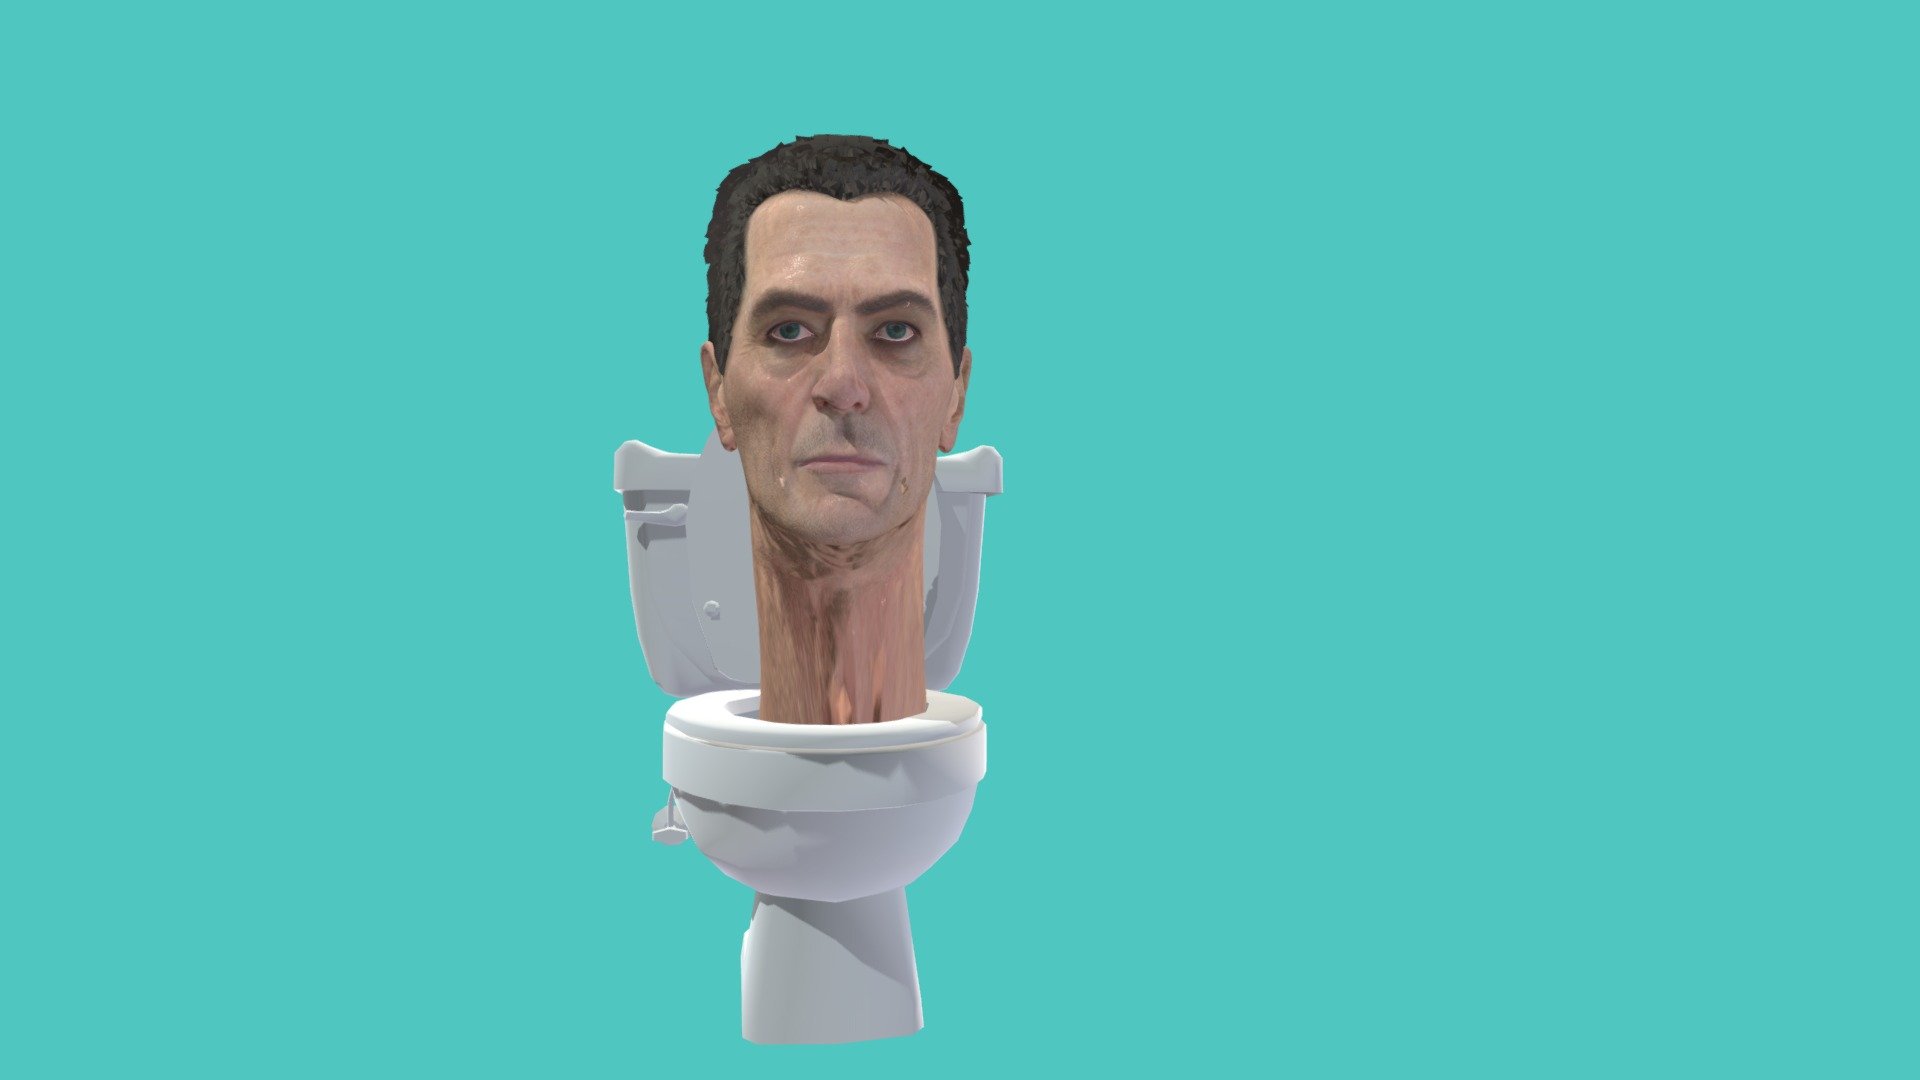 the boss toilet from skibidi toilet videos ,it's free and you can use it in your videos.
follow to keep up with the rest of the skibidi toilet characters.
the file format is .blend file.
enjoy 3d model